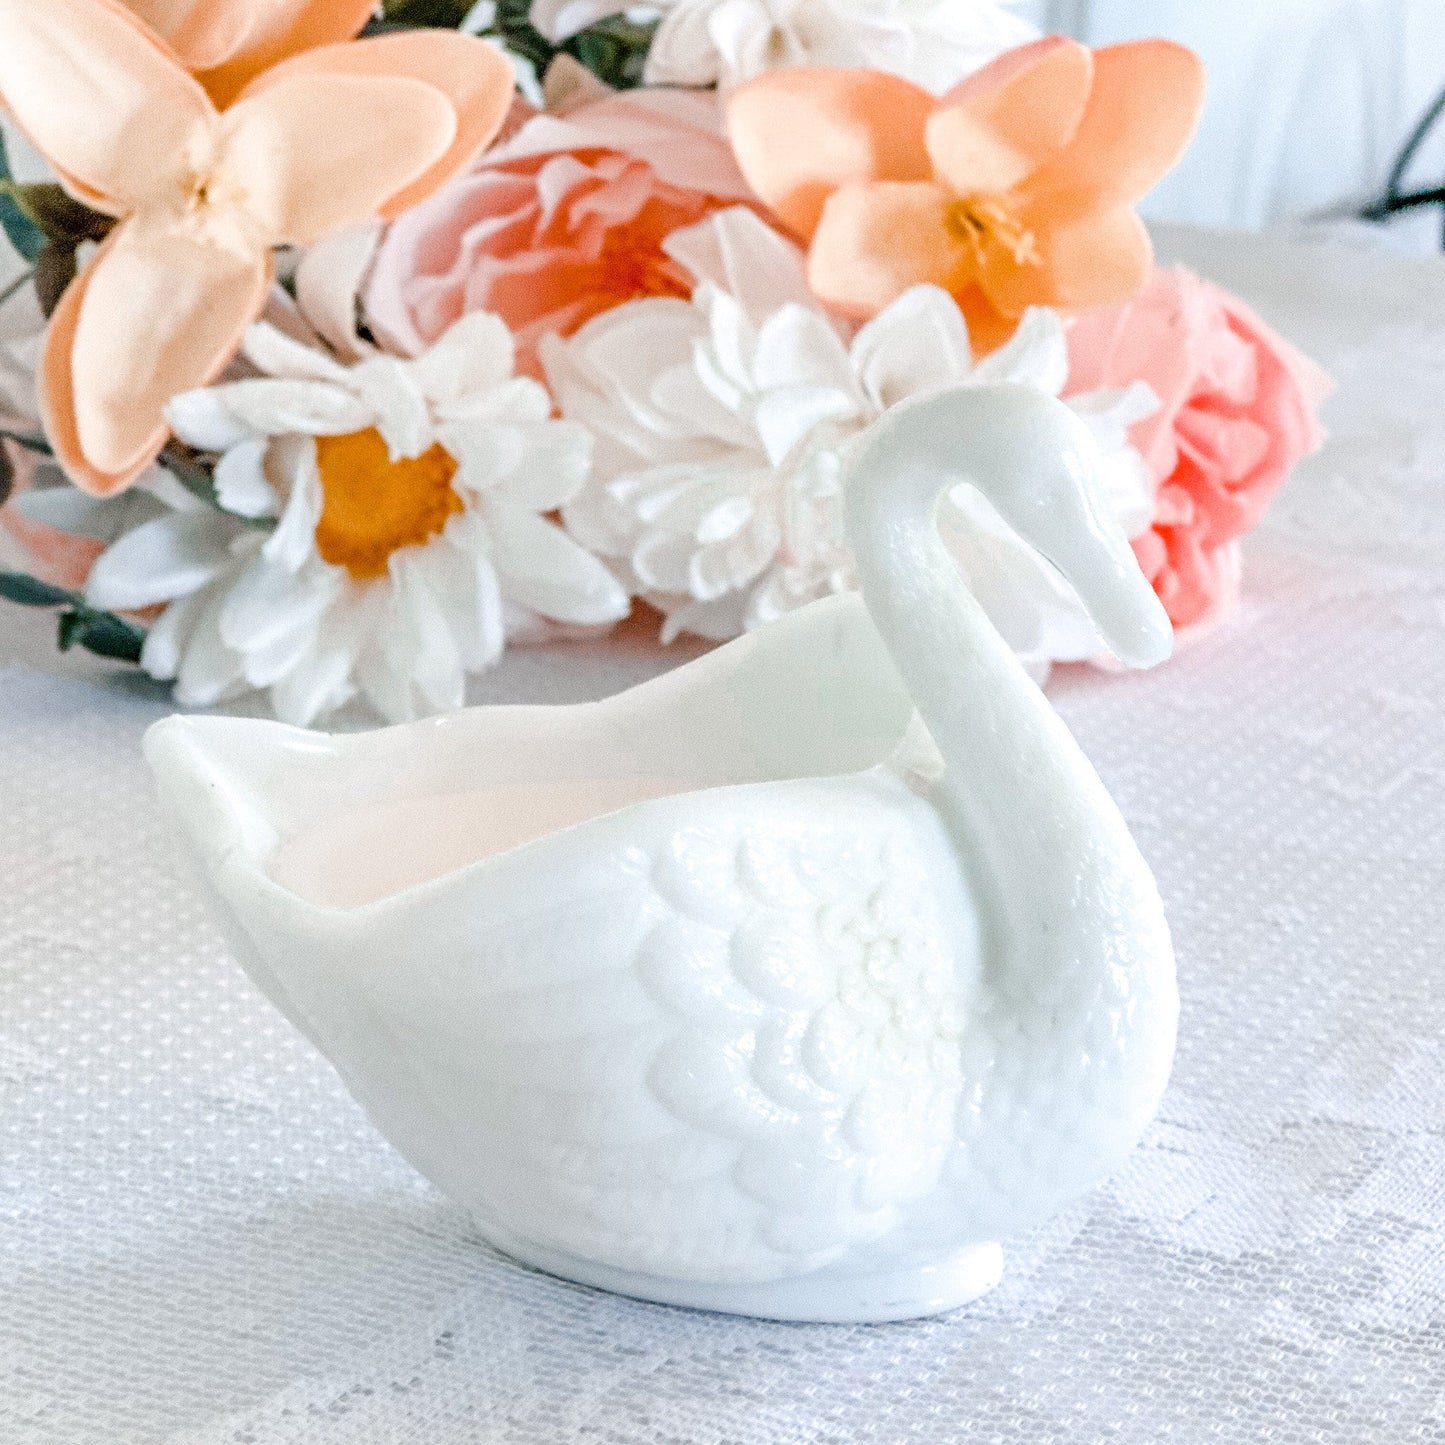 Moonflower Scented Candle in Vintage Milk Glass Swan Dish